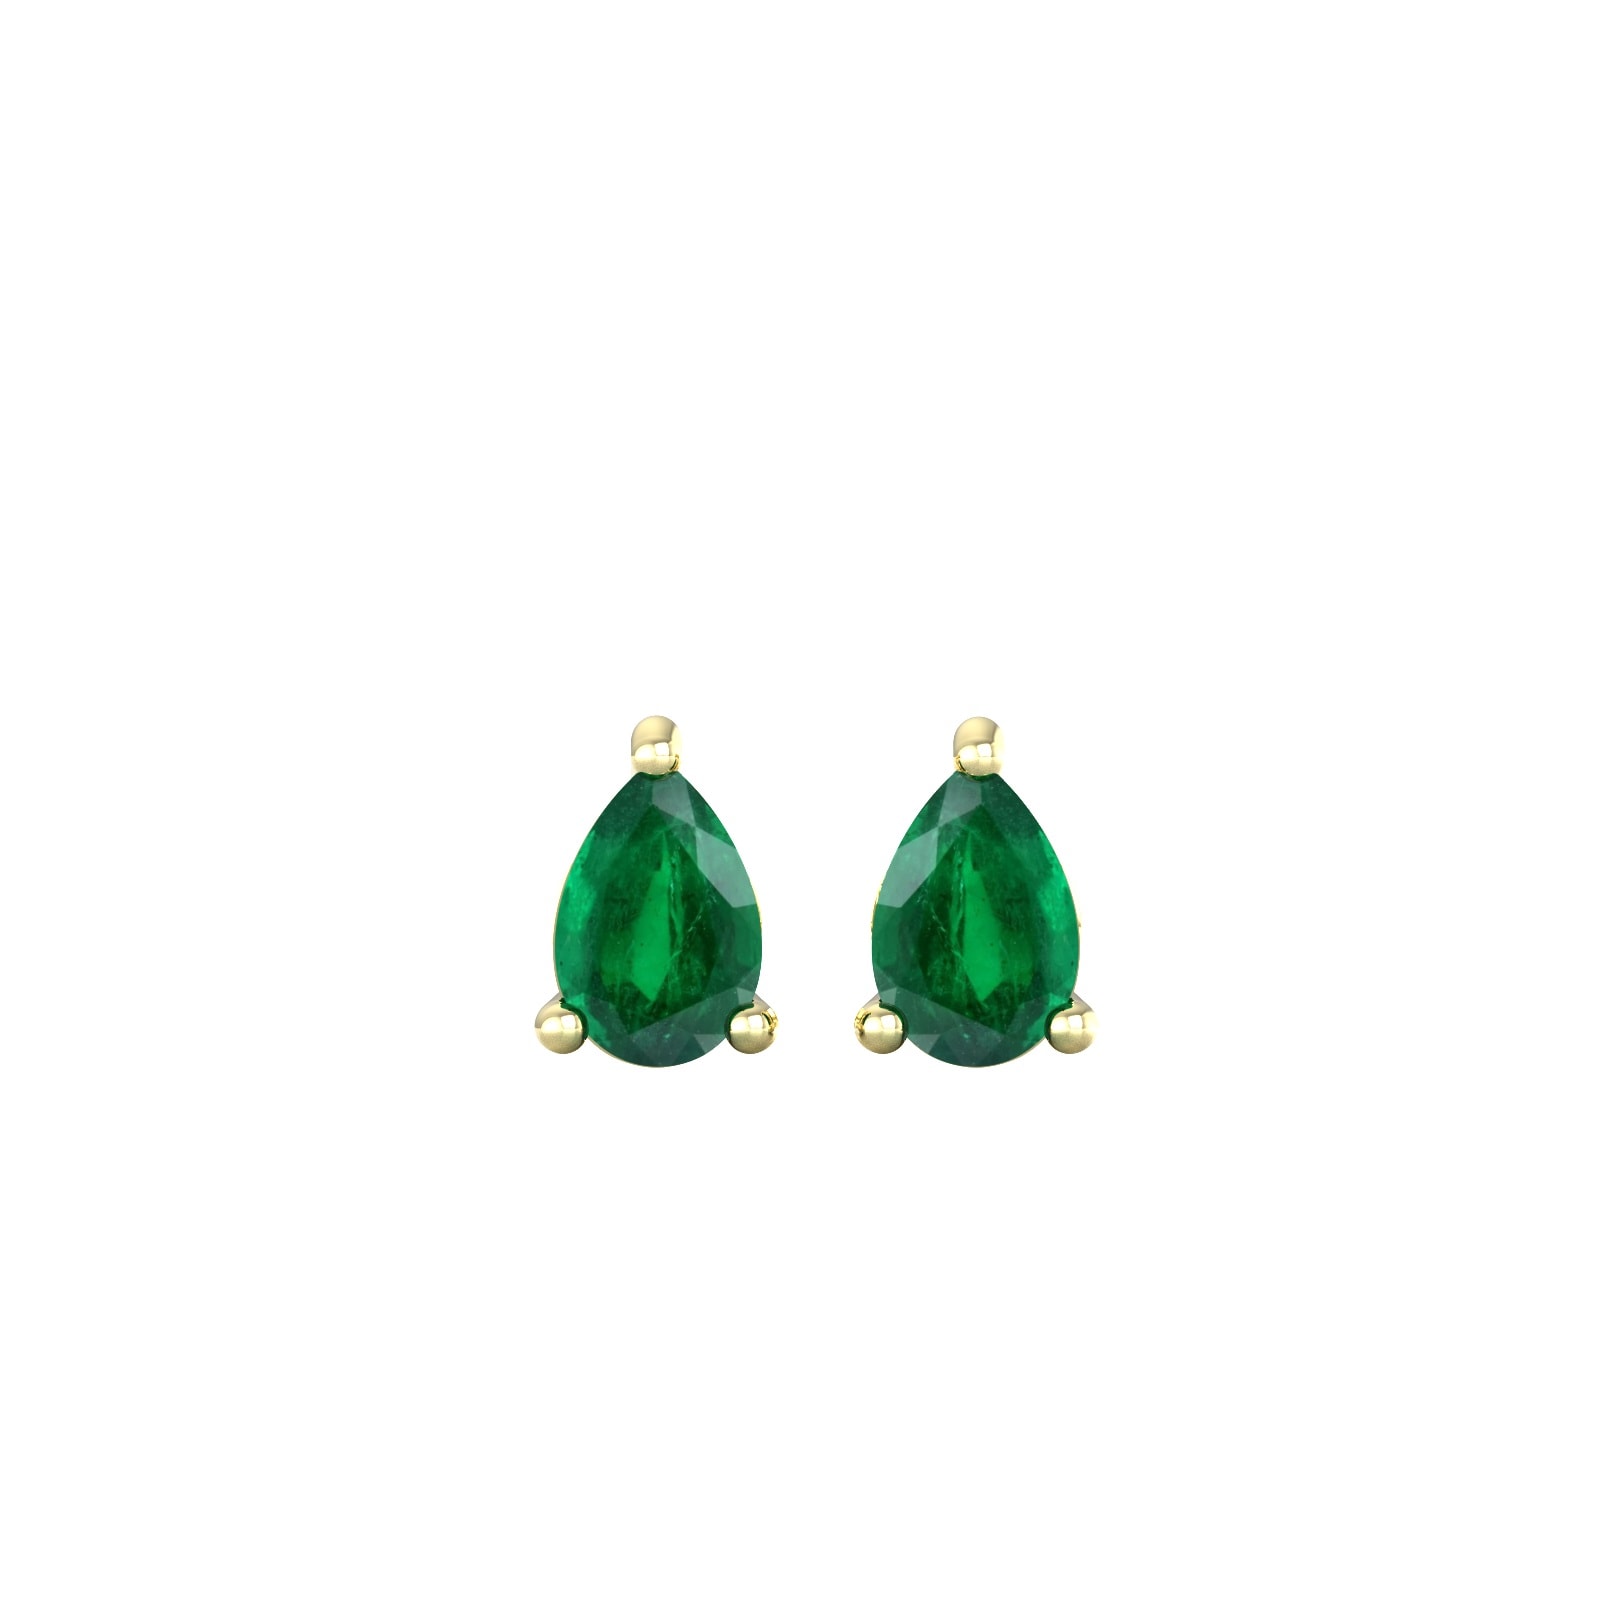 9ct Yellow Gold 4 Claw Pear Cut Emerald Stud Earrings